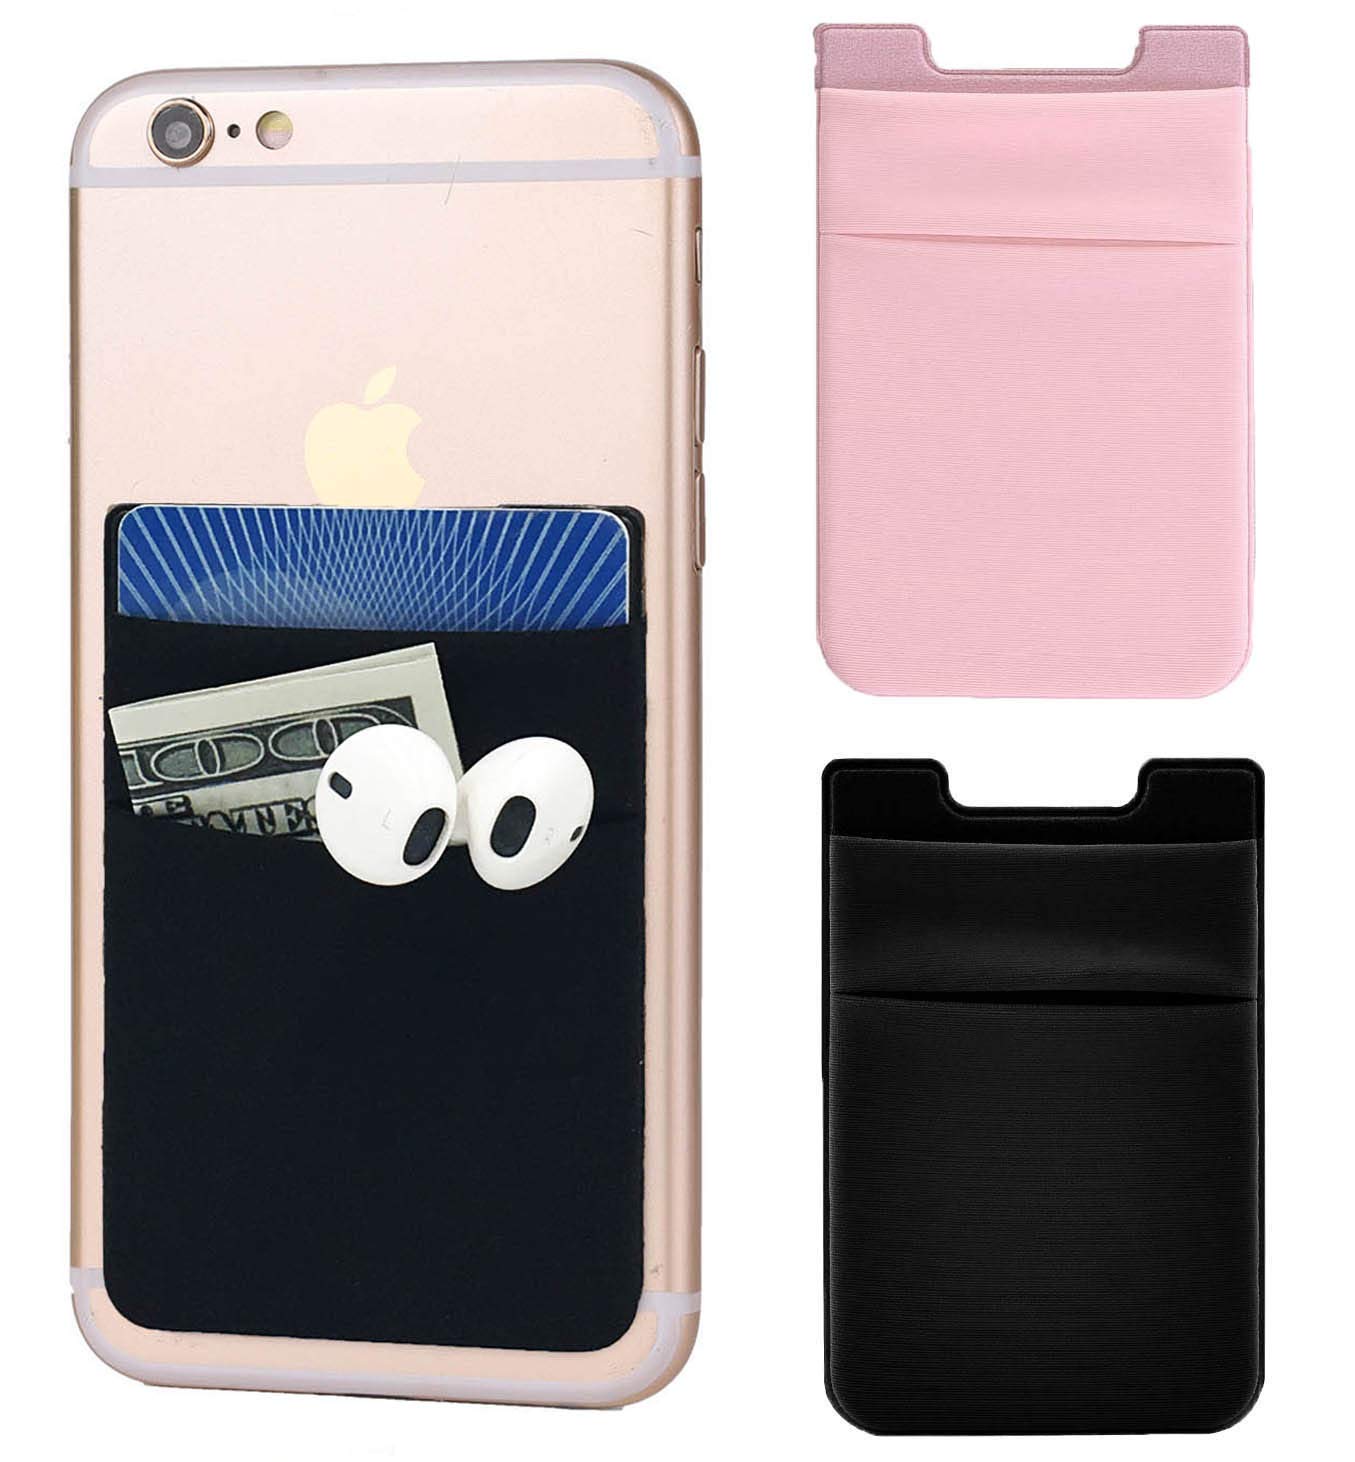 Credit Card Holder for Phone Stick-on Pouch